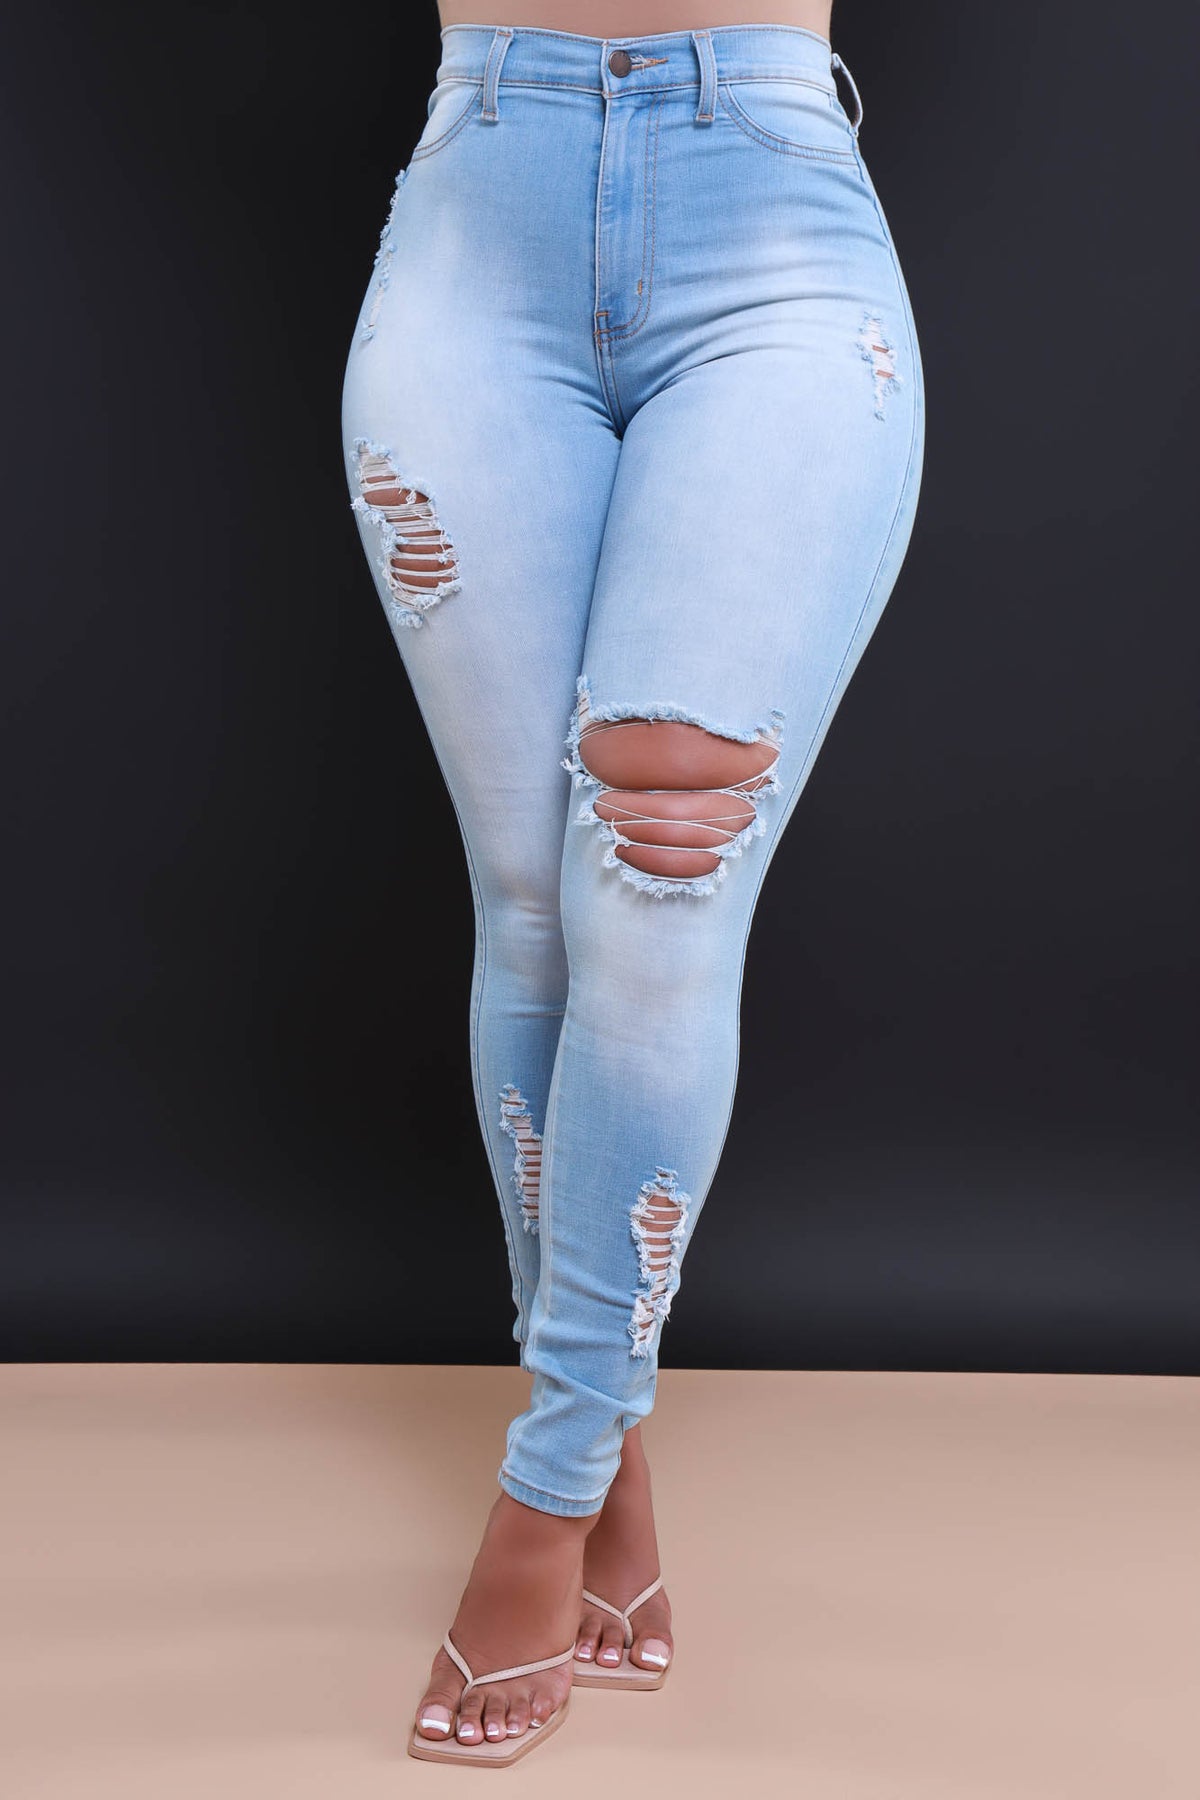 
              Say Less High Rise Distressed Skinny Jeans - Light Wash - Swank A Posh
            